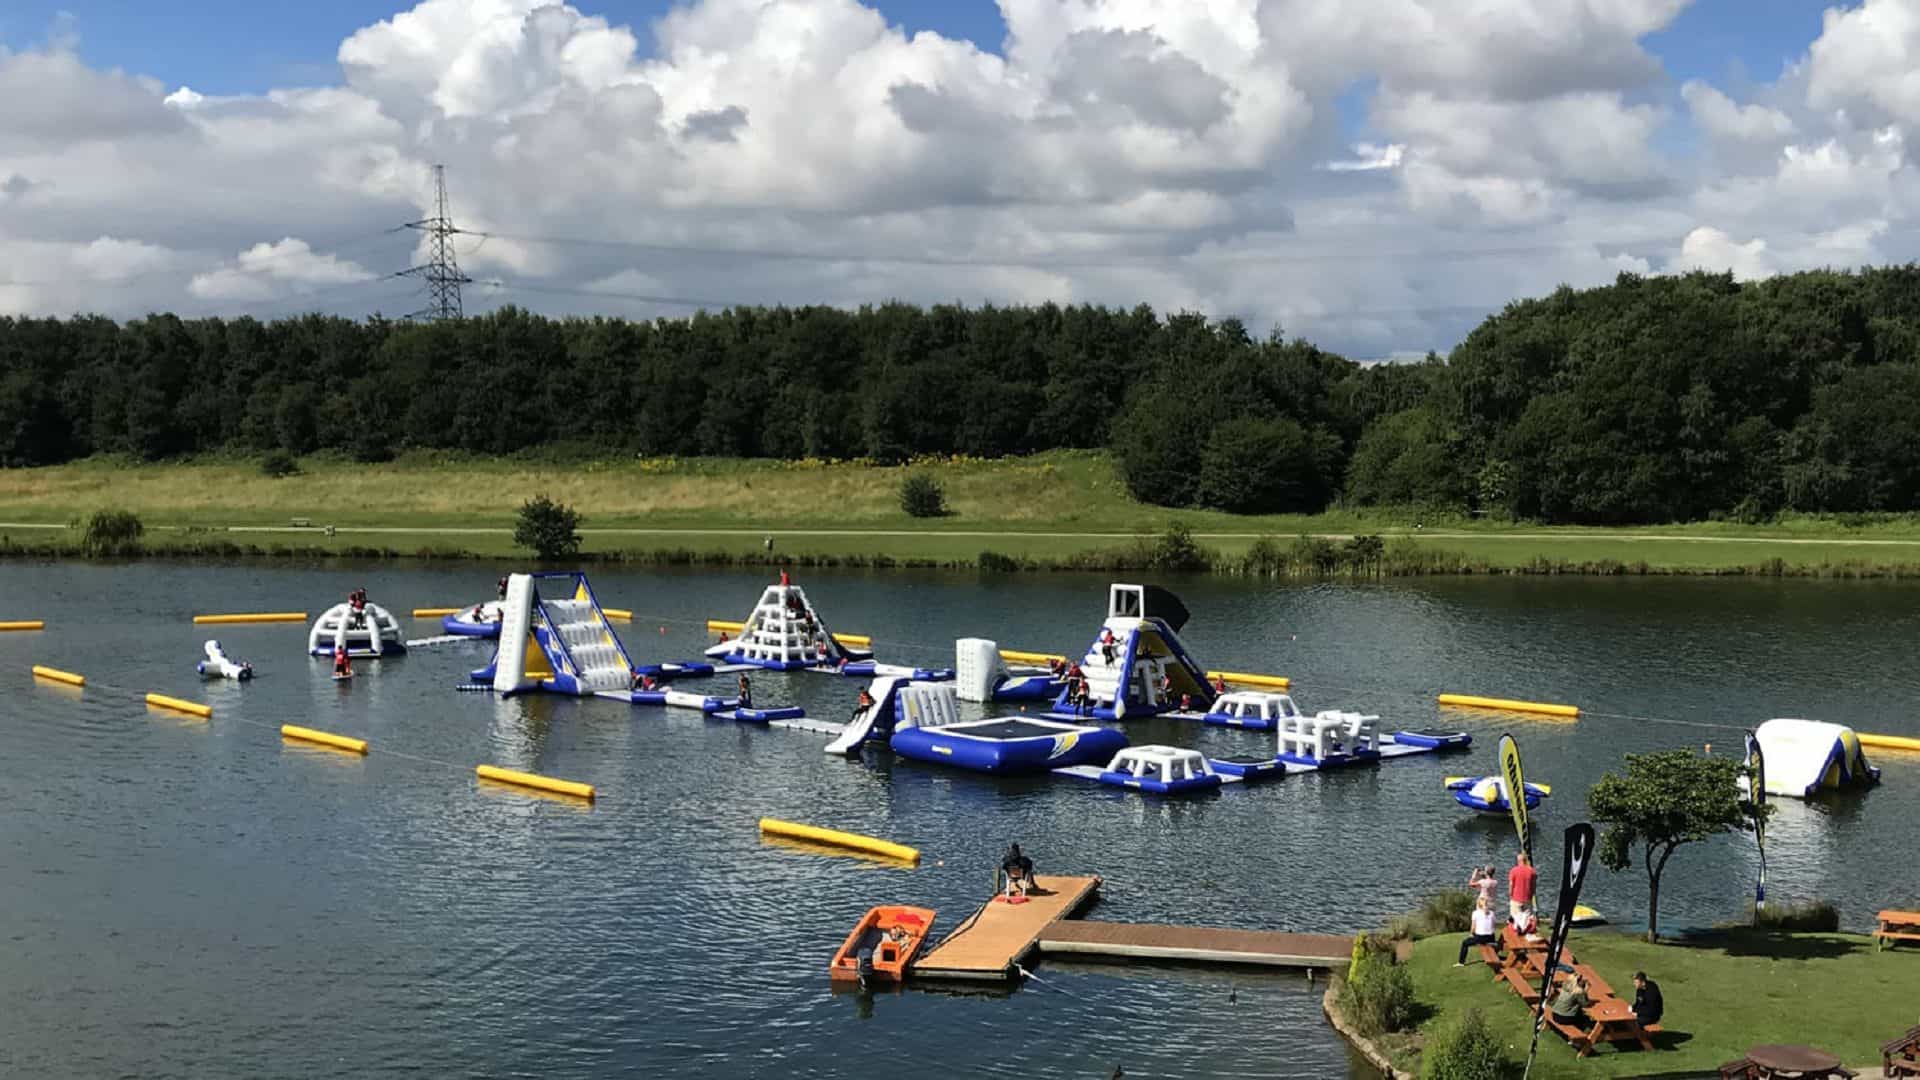 Sheffield Cable Waterski and Aqua Park in UK